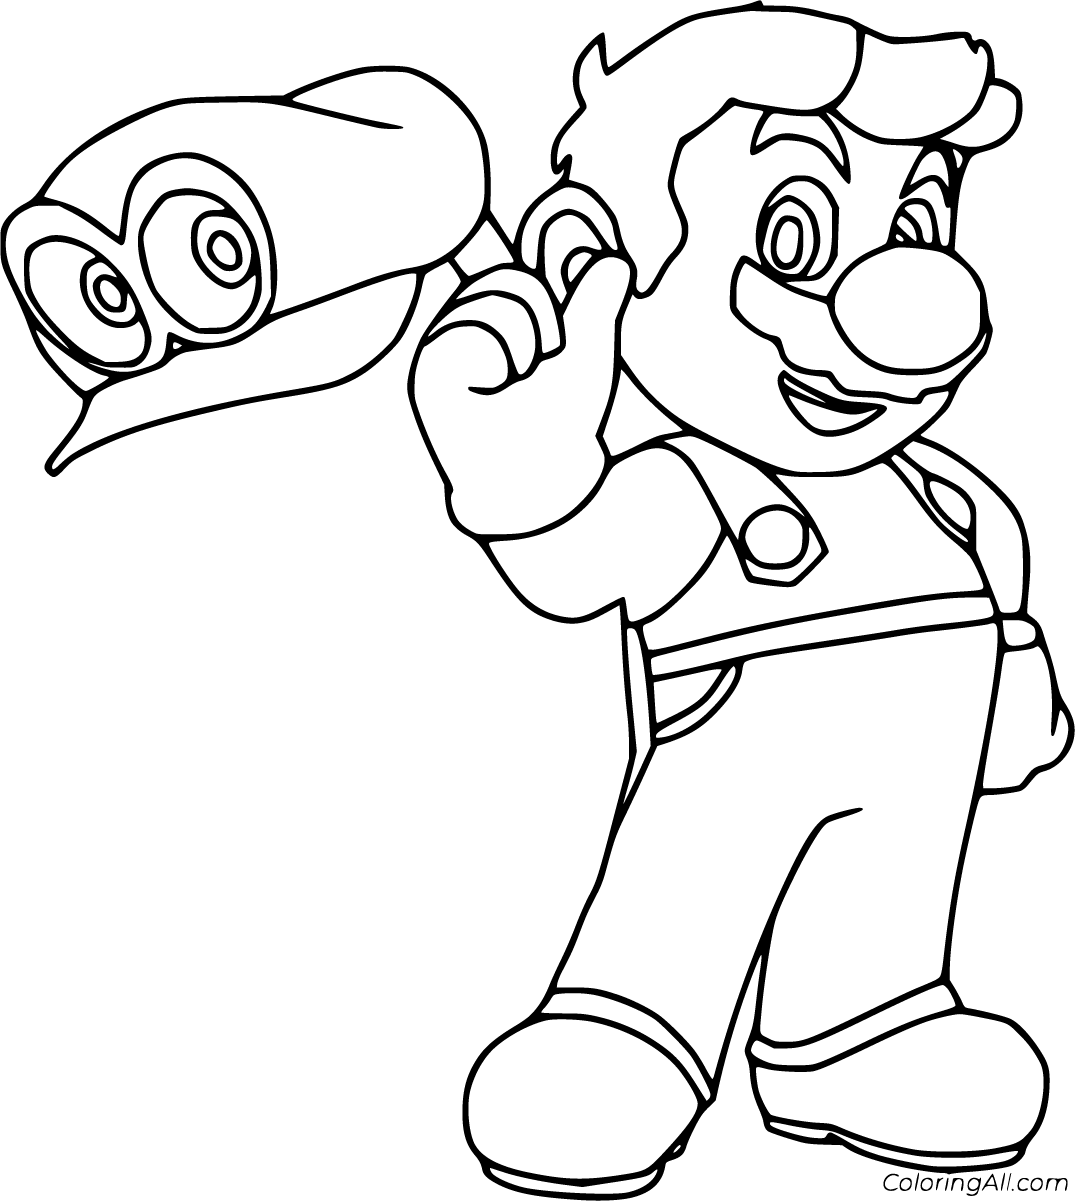 waluigi and wario coloring pages